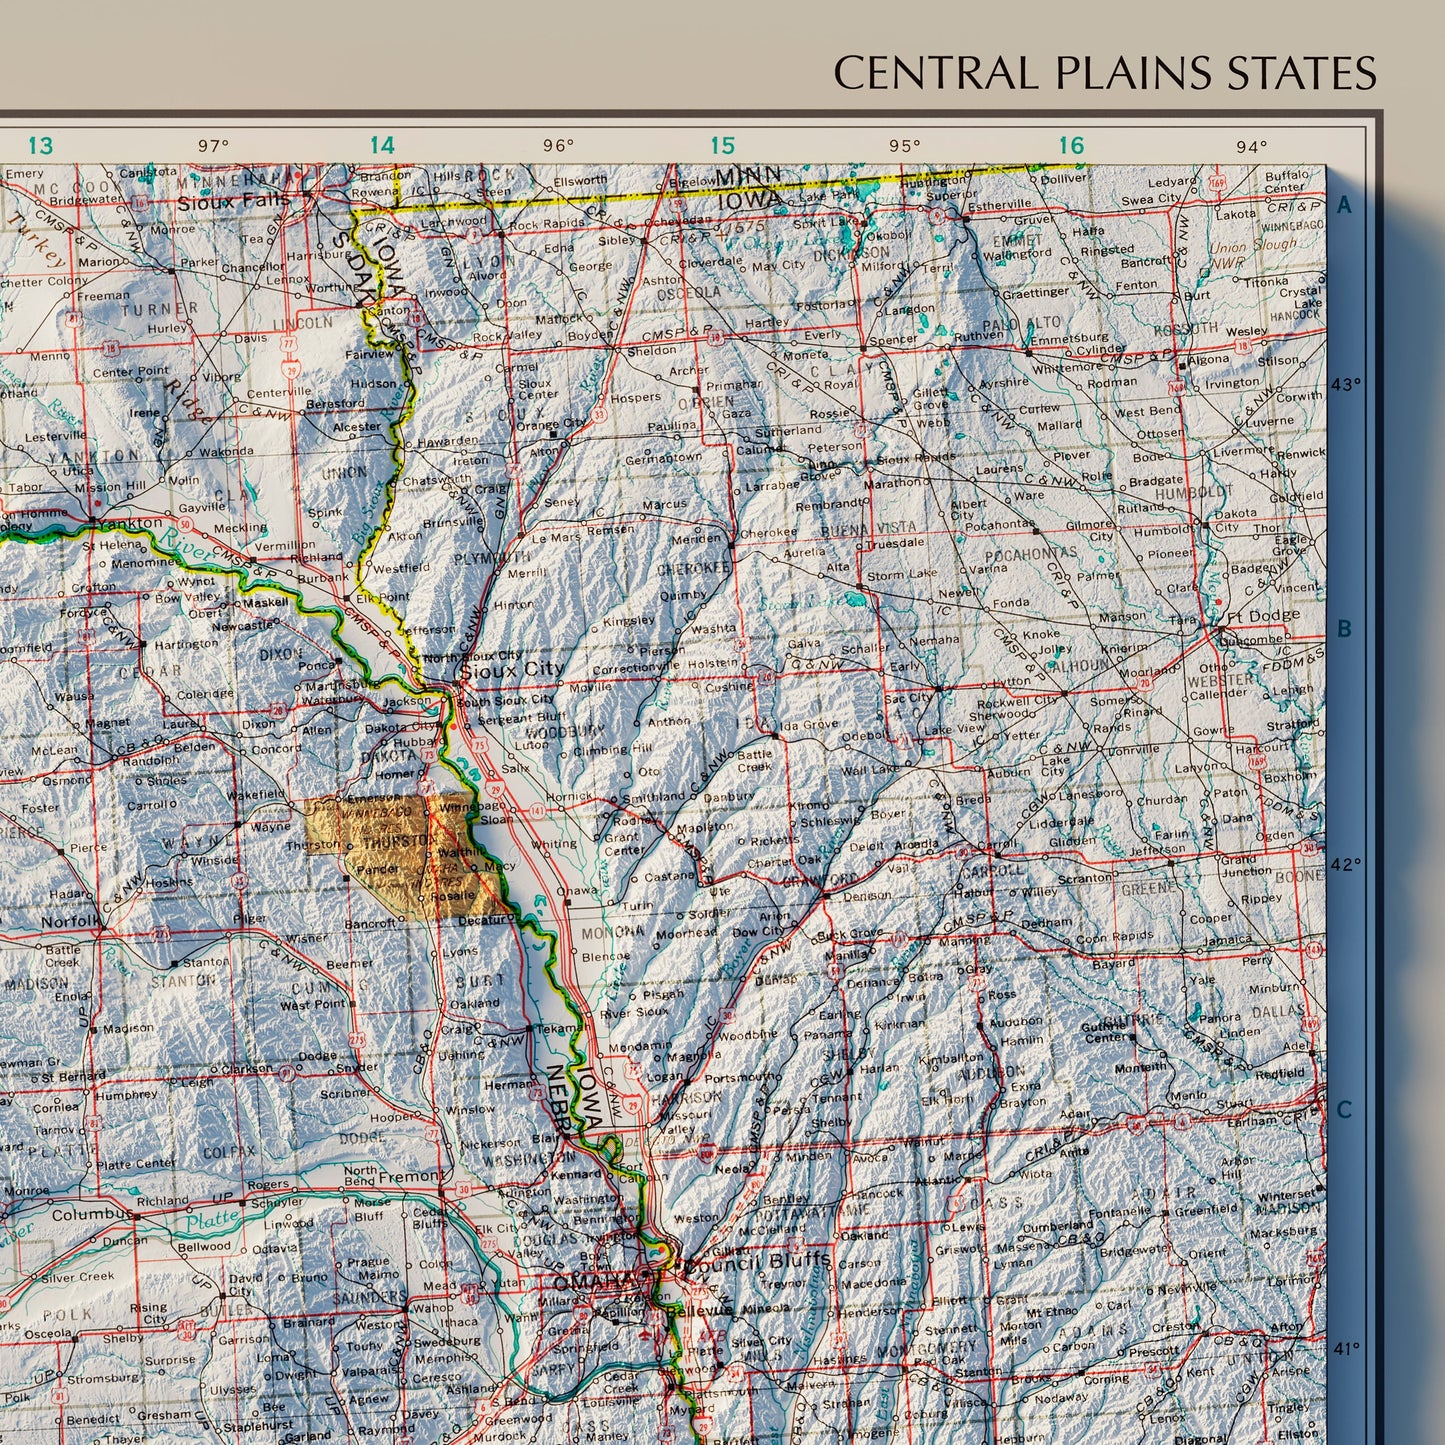 Central Plains States 1970 Shaded Relief Map